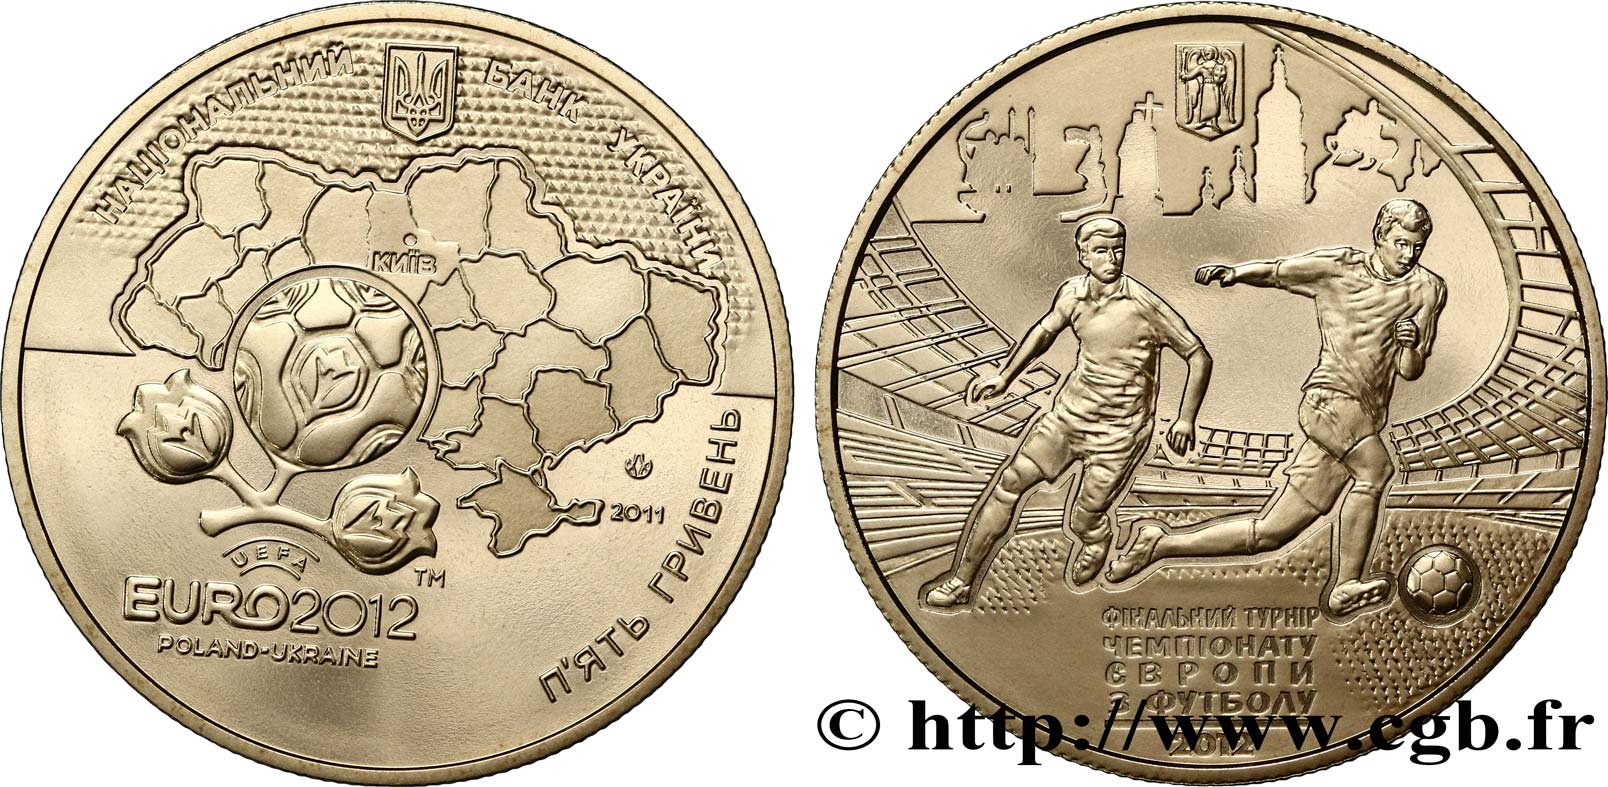 Details about   2012 Ukraine Coin 5 UAH Hryven 200 Years of the Nikitsky Botanical Garden UNC